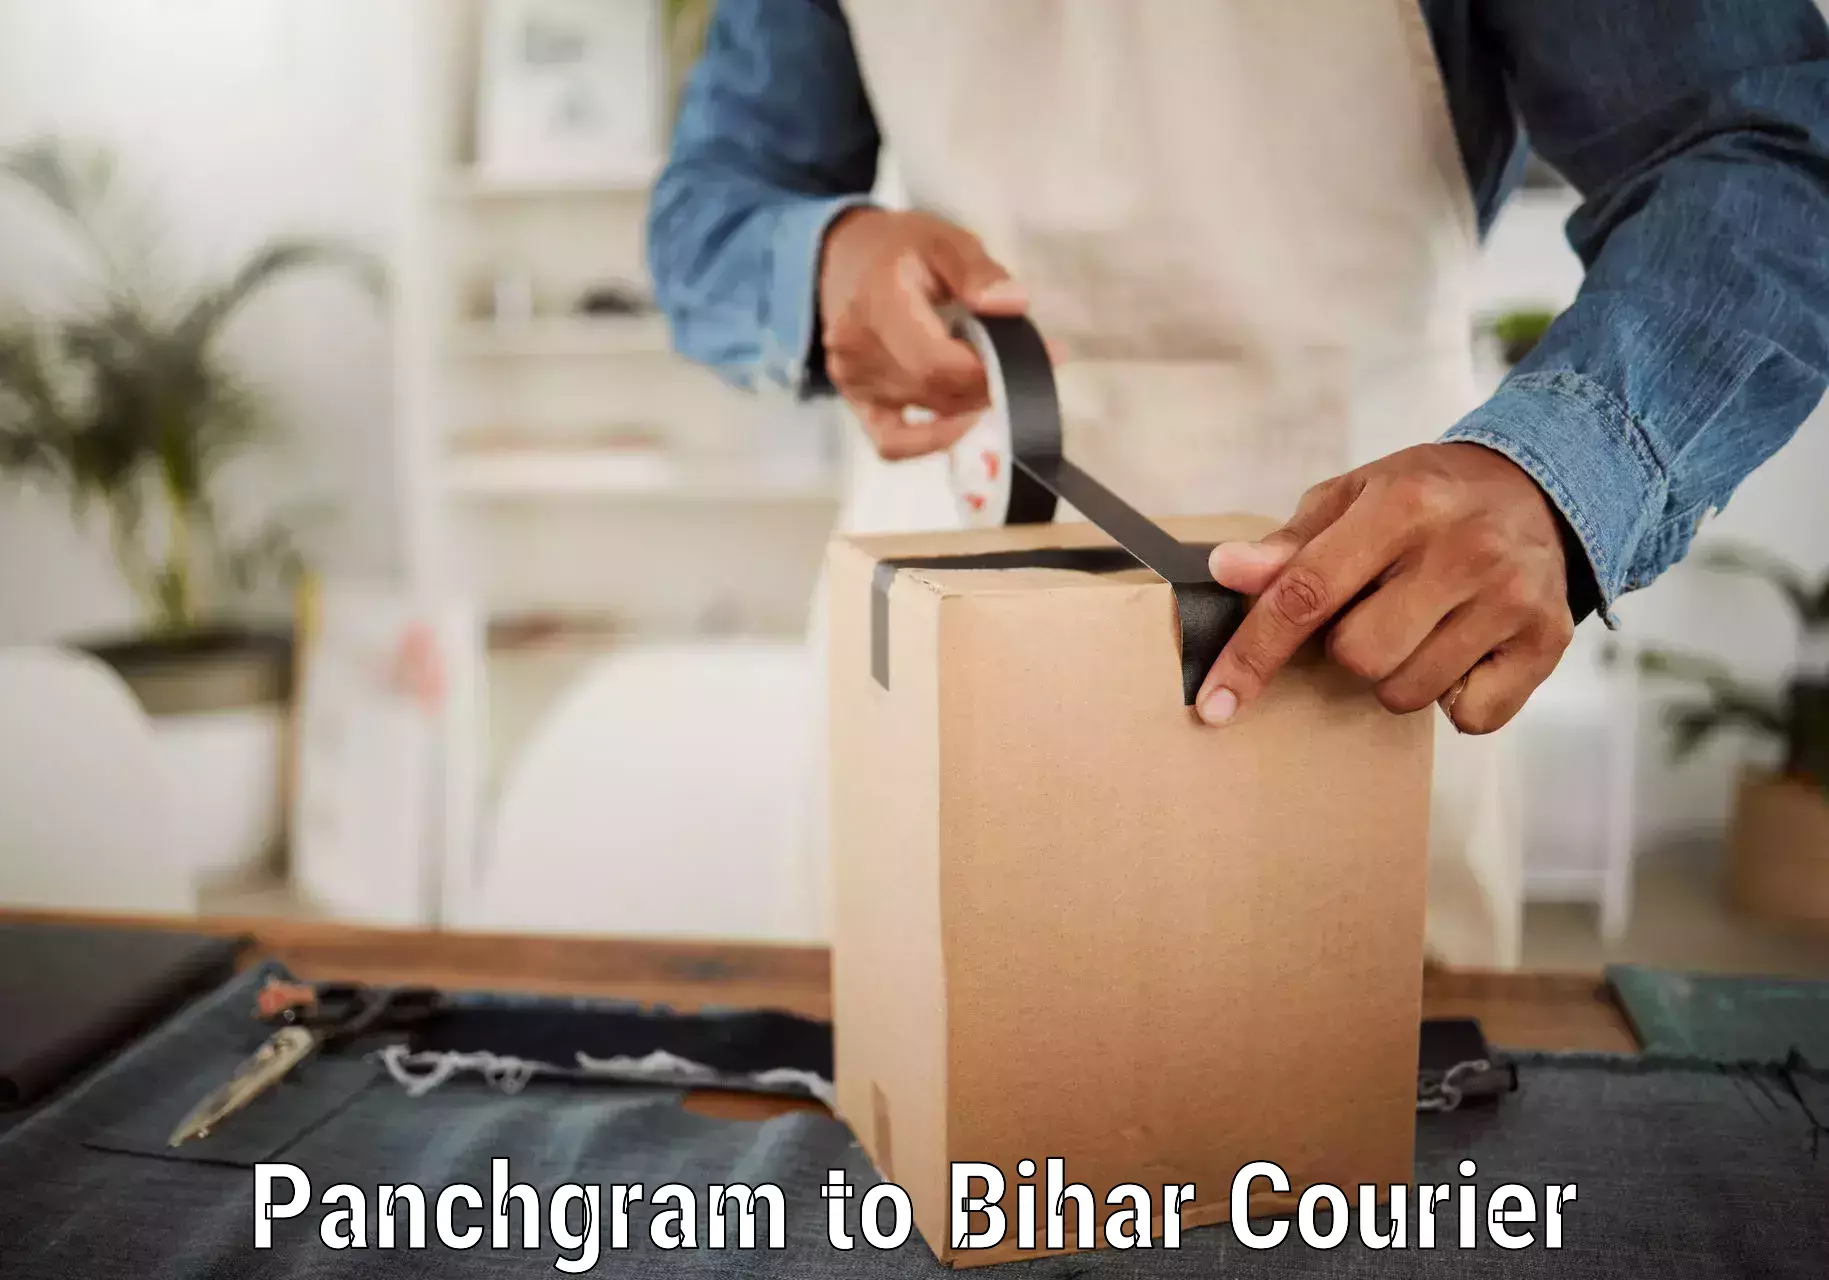 Courier service efficiency in Panchgram to Barhiya